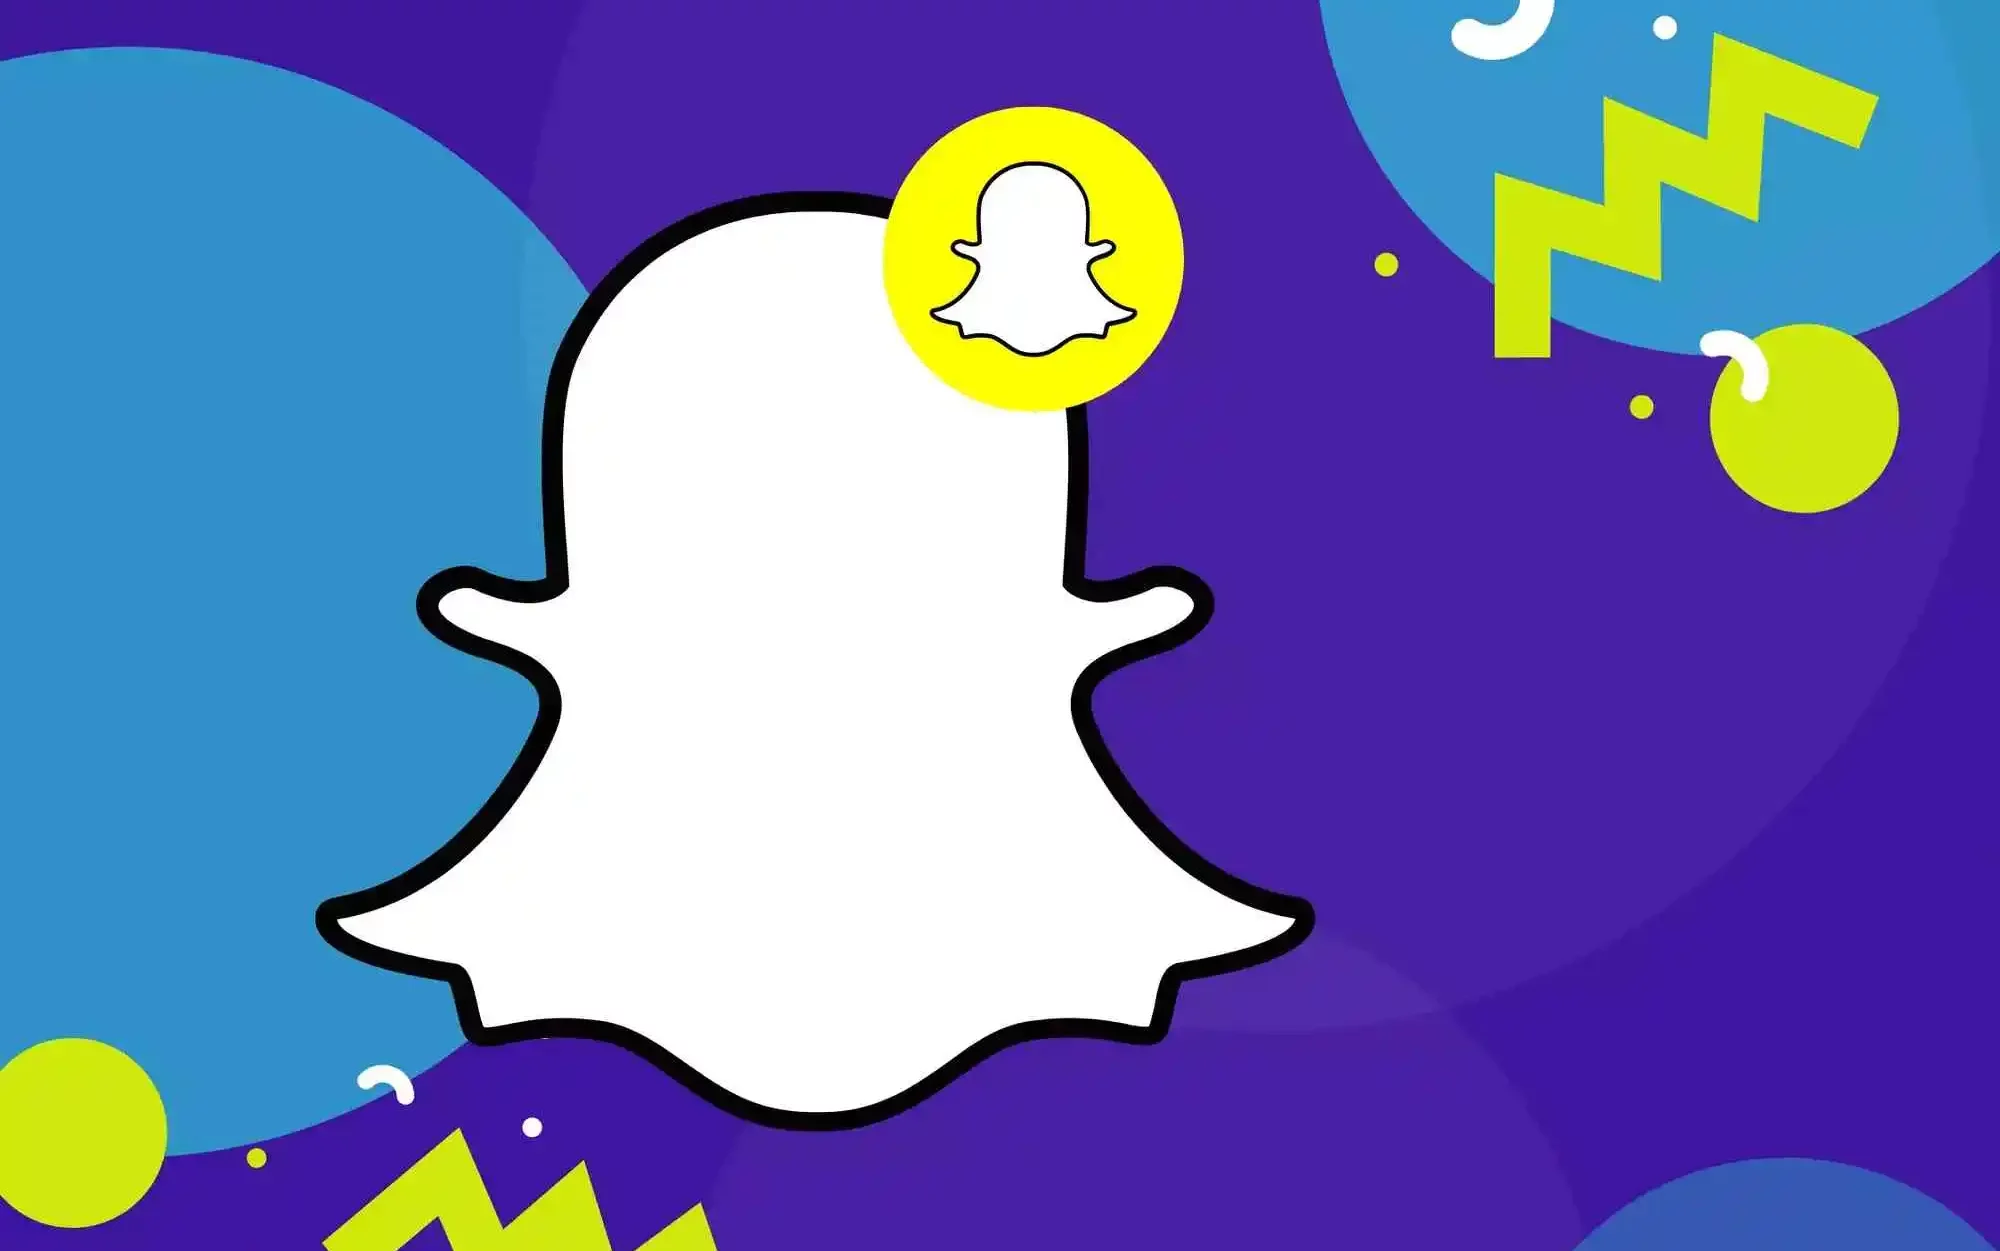 How To Make A Private Story On Snapchat | The Guide To Snapchat!